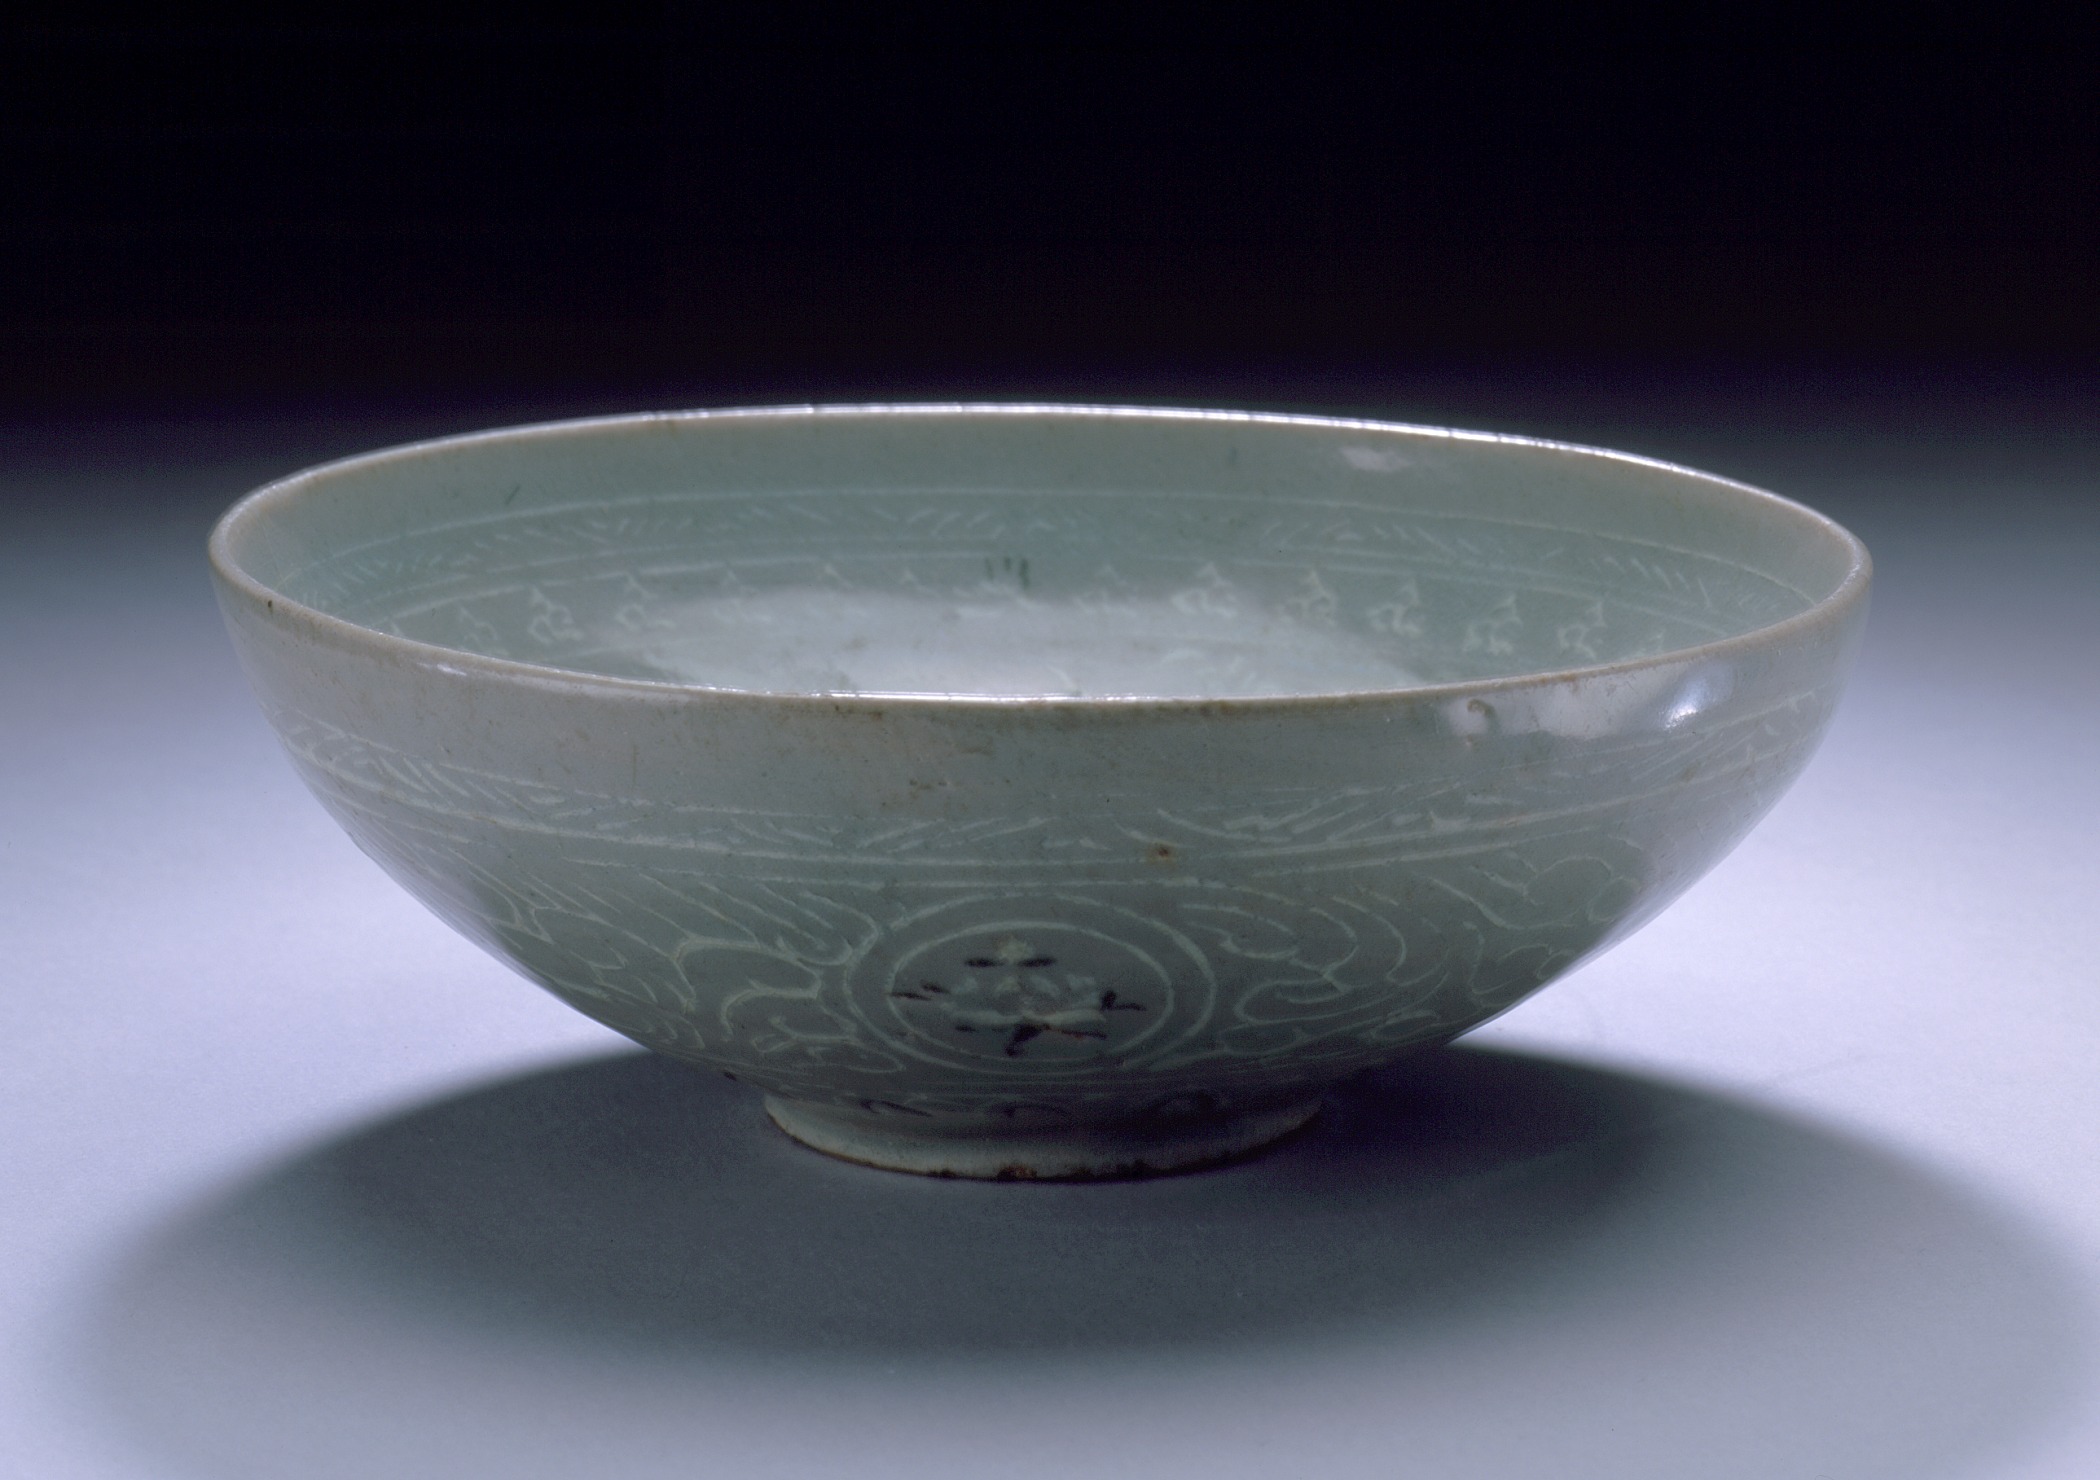 a bowl with white frosted decoration on it